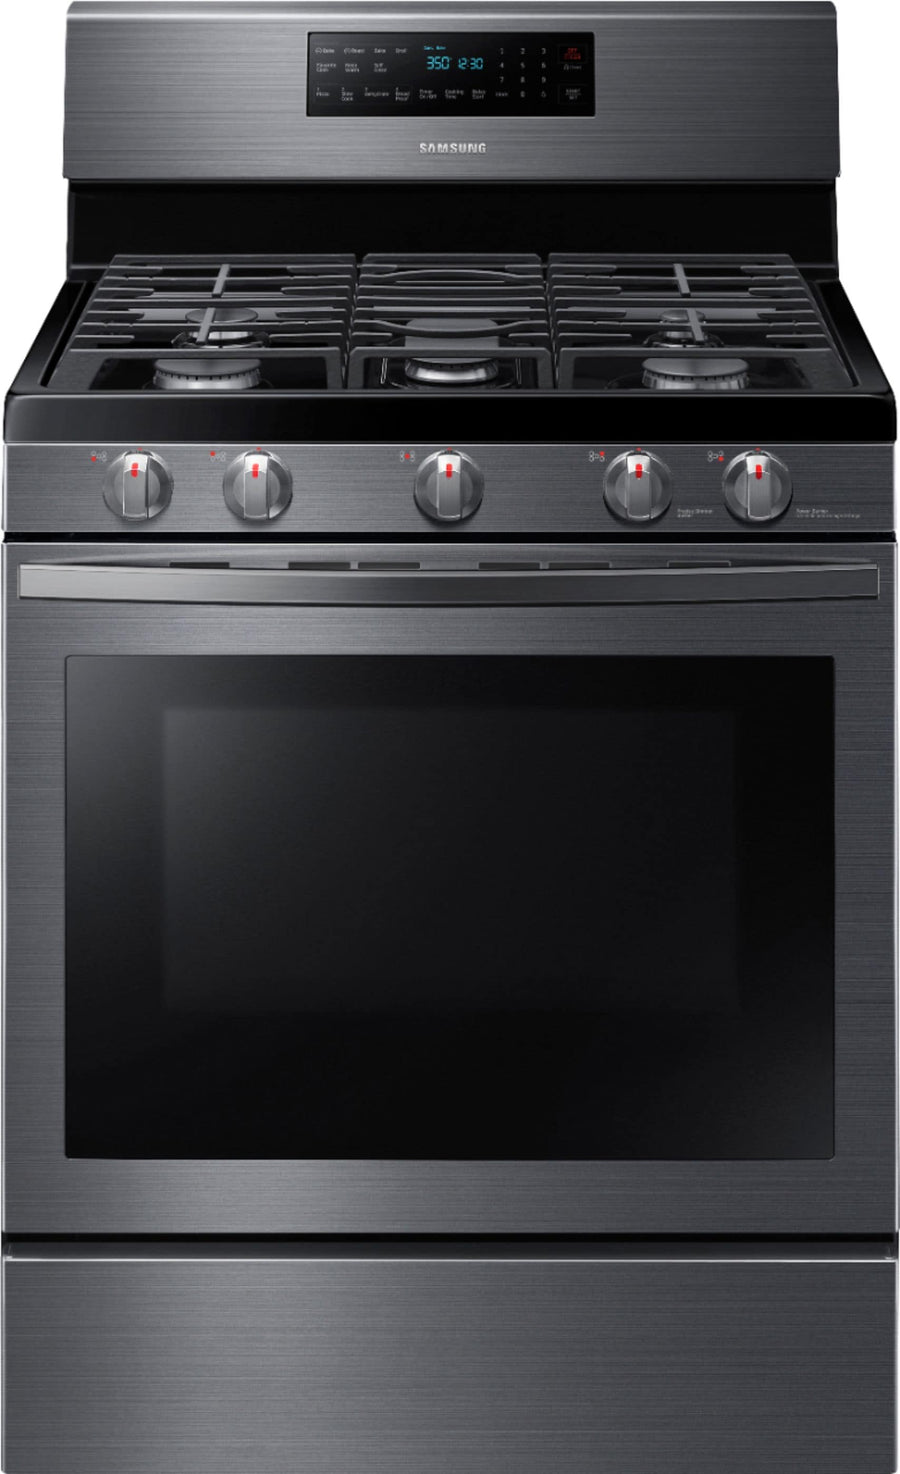 Samsung - 5.8 Cu. Ft. Freestanding Gas Convection Range with Self-High Heat Cleaning - Black stainless steel_0